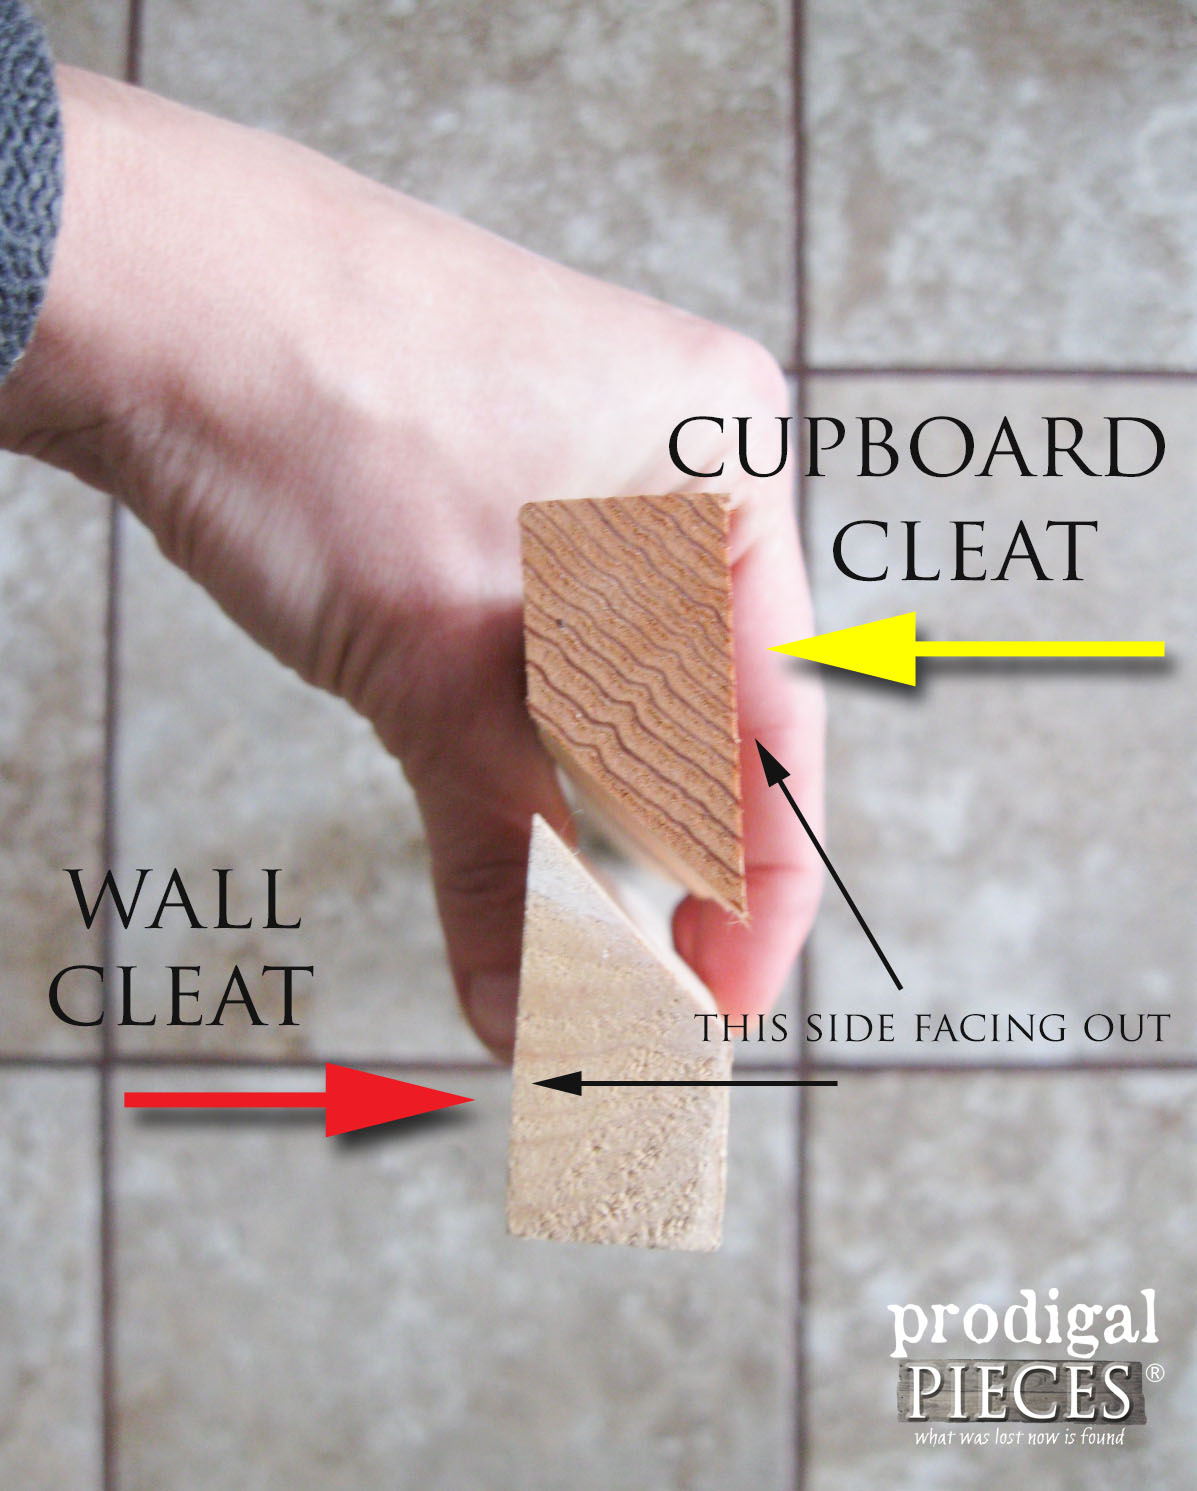 DIY Wall Cleat Diagram by Prodigal Pieces | prodigalpieces.com